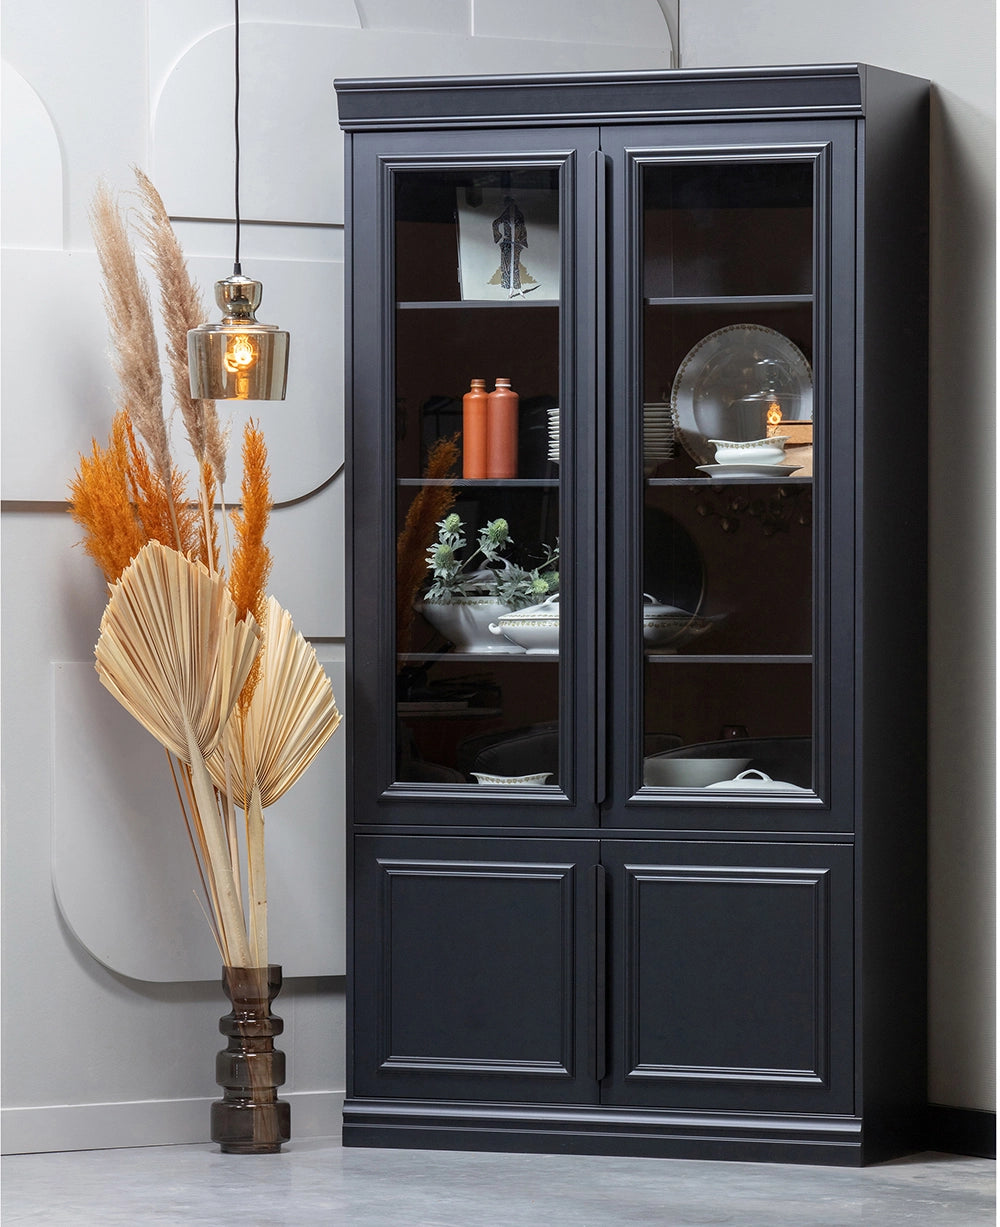 Maca Display Cabinet in Matte Black Finish with Plates and Hanging Lamp in Living Room Setting